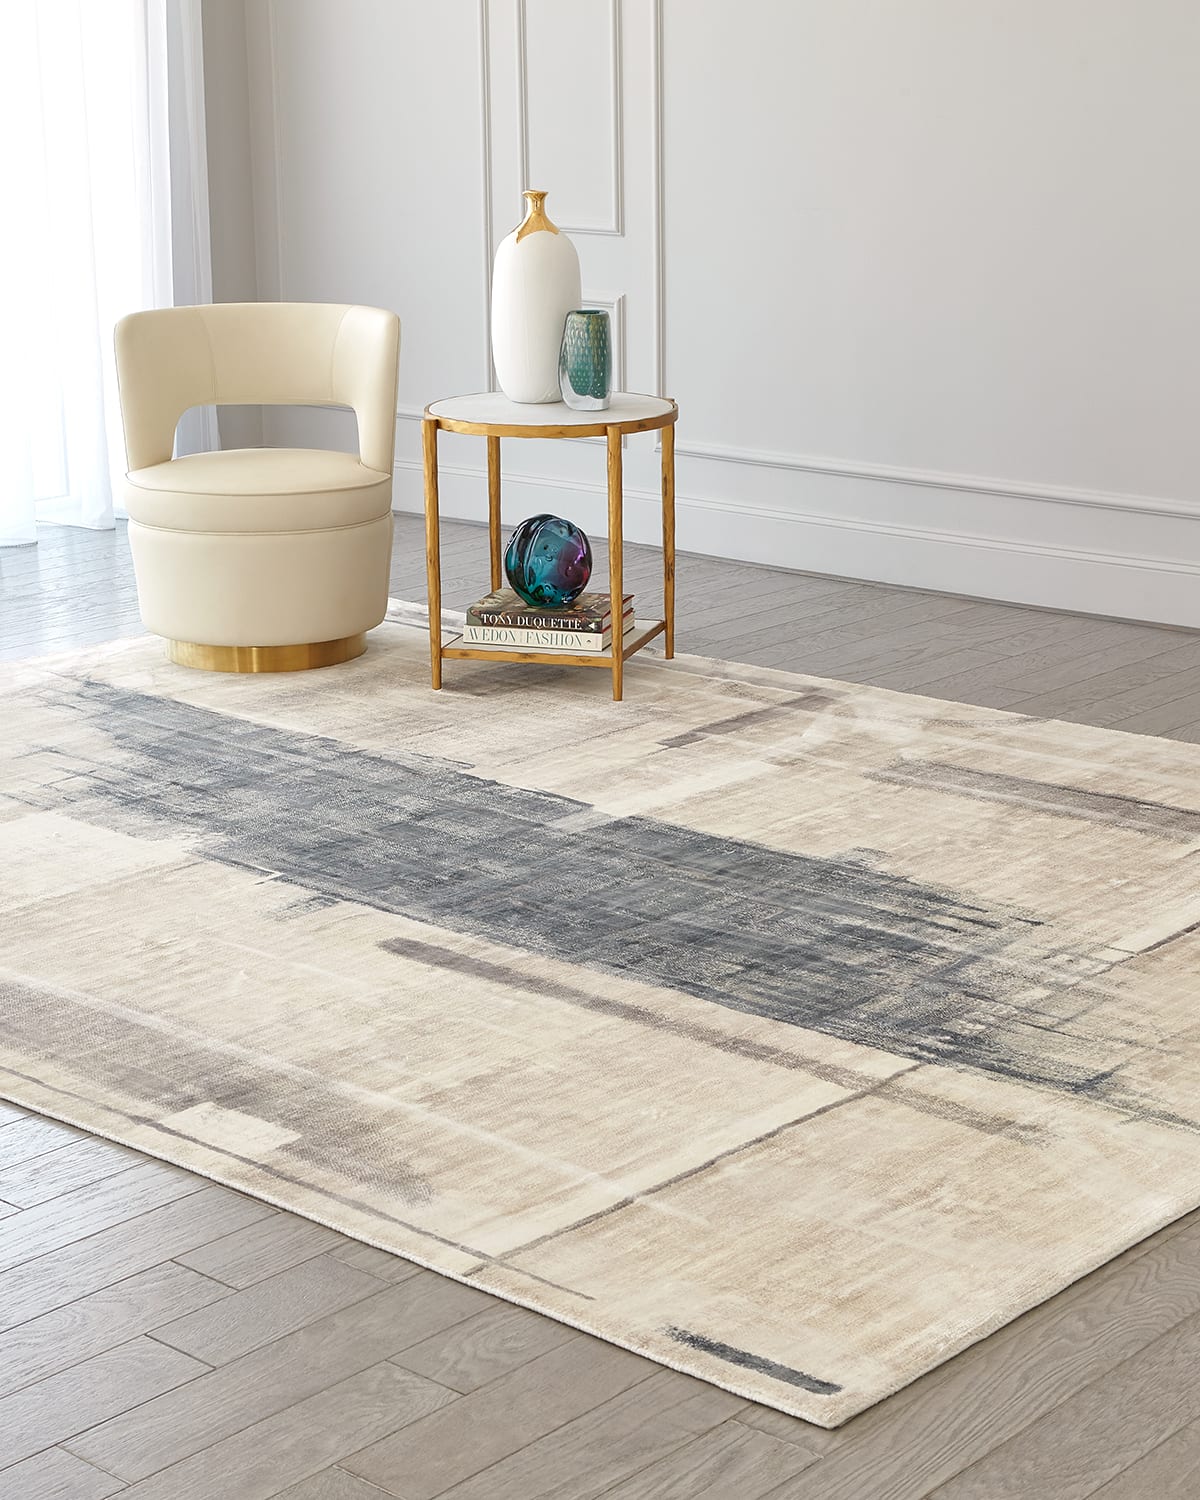 George Sellers For Global Views Art Hand-woven Rug, 9' X 12' In Gray